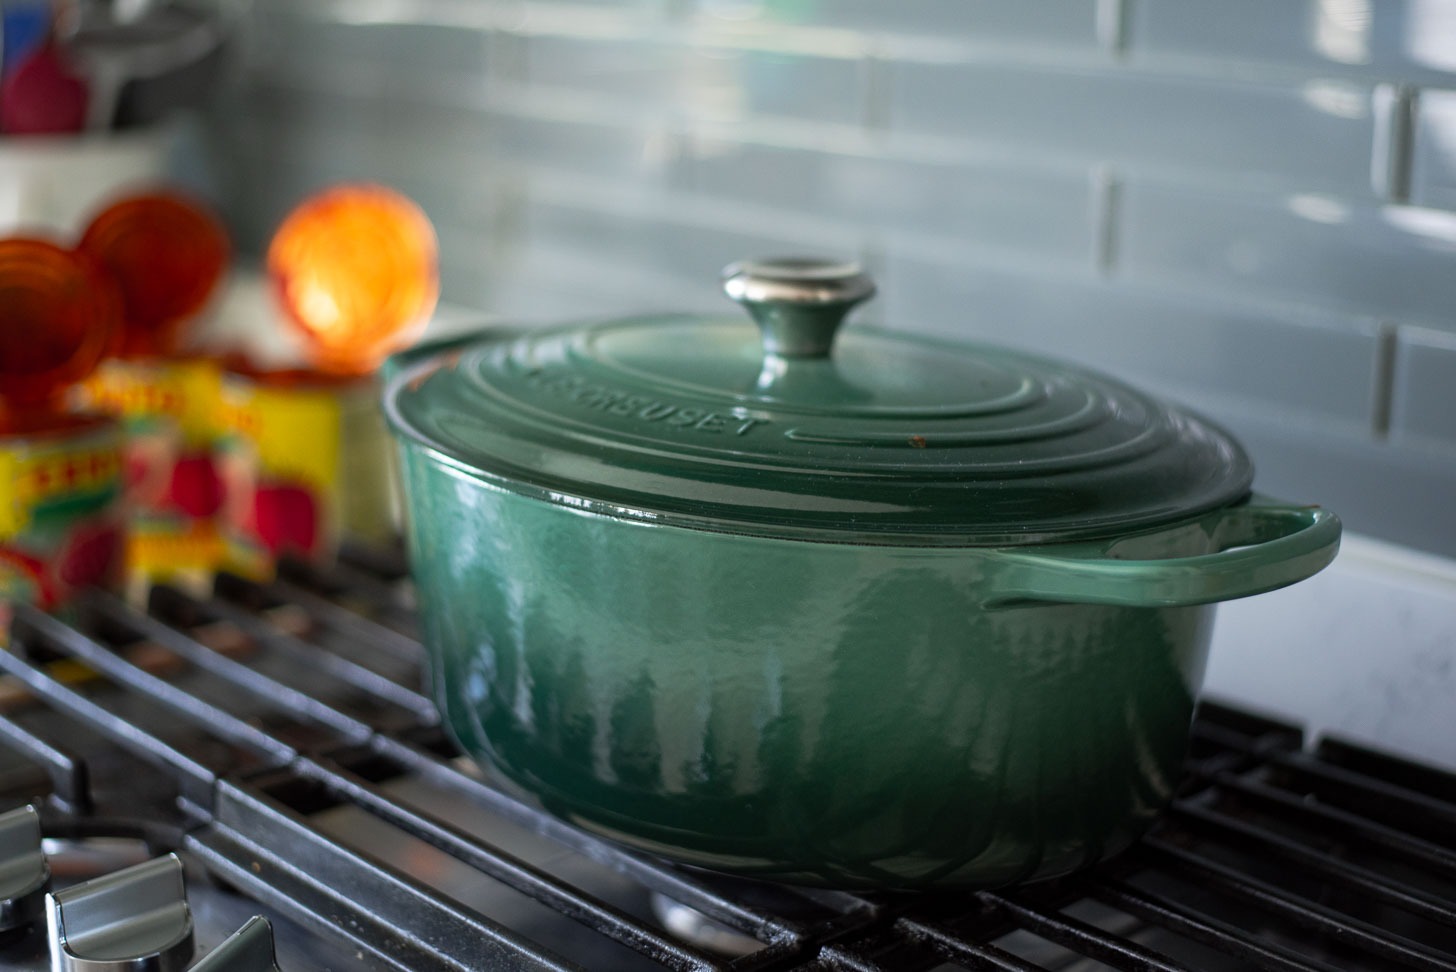 Homemade spaghetti sauce is simmering inside of a large dutch oven on the stove.